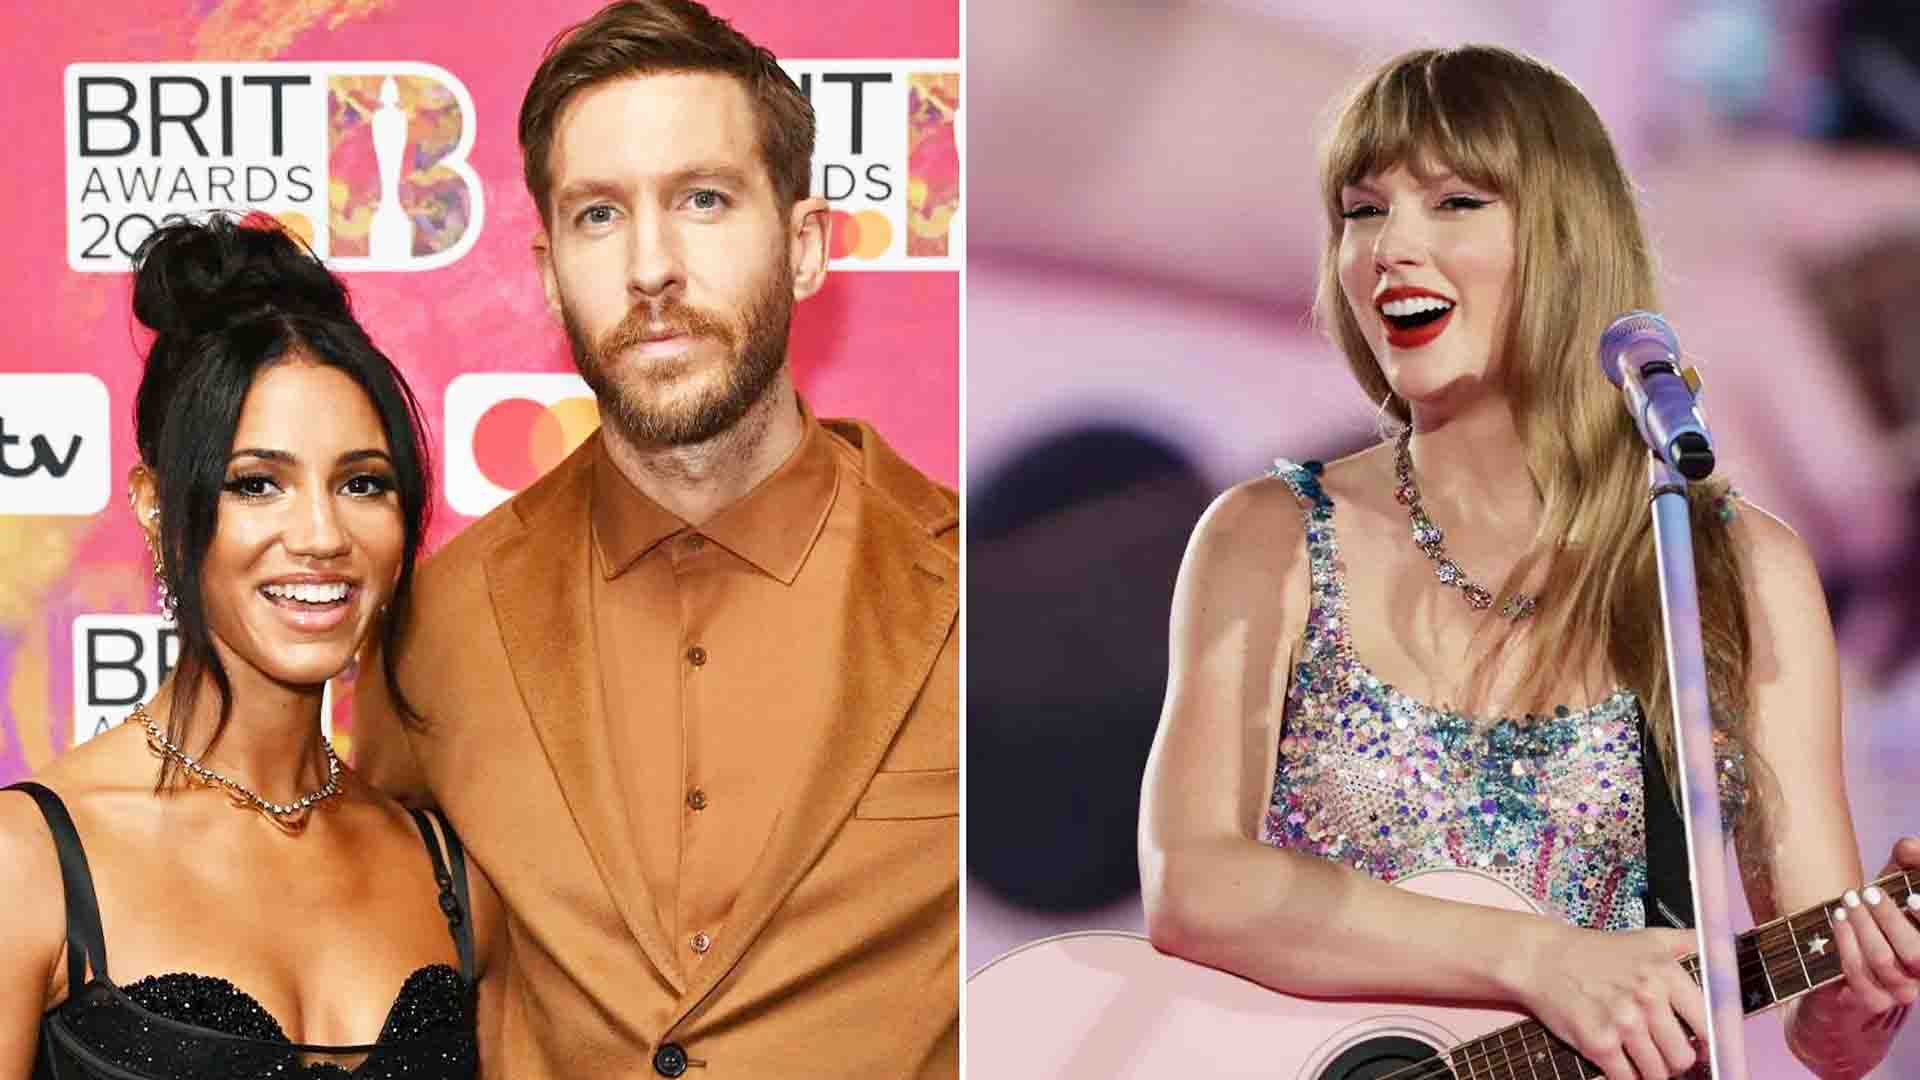 Taylor Swift’s Ex Calvin Harris’ Wife Listens to Her Song!